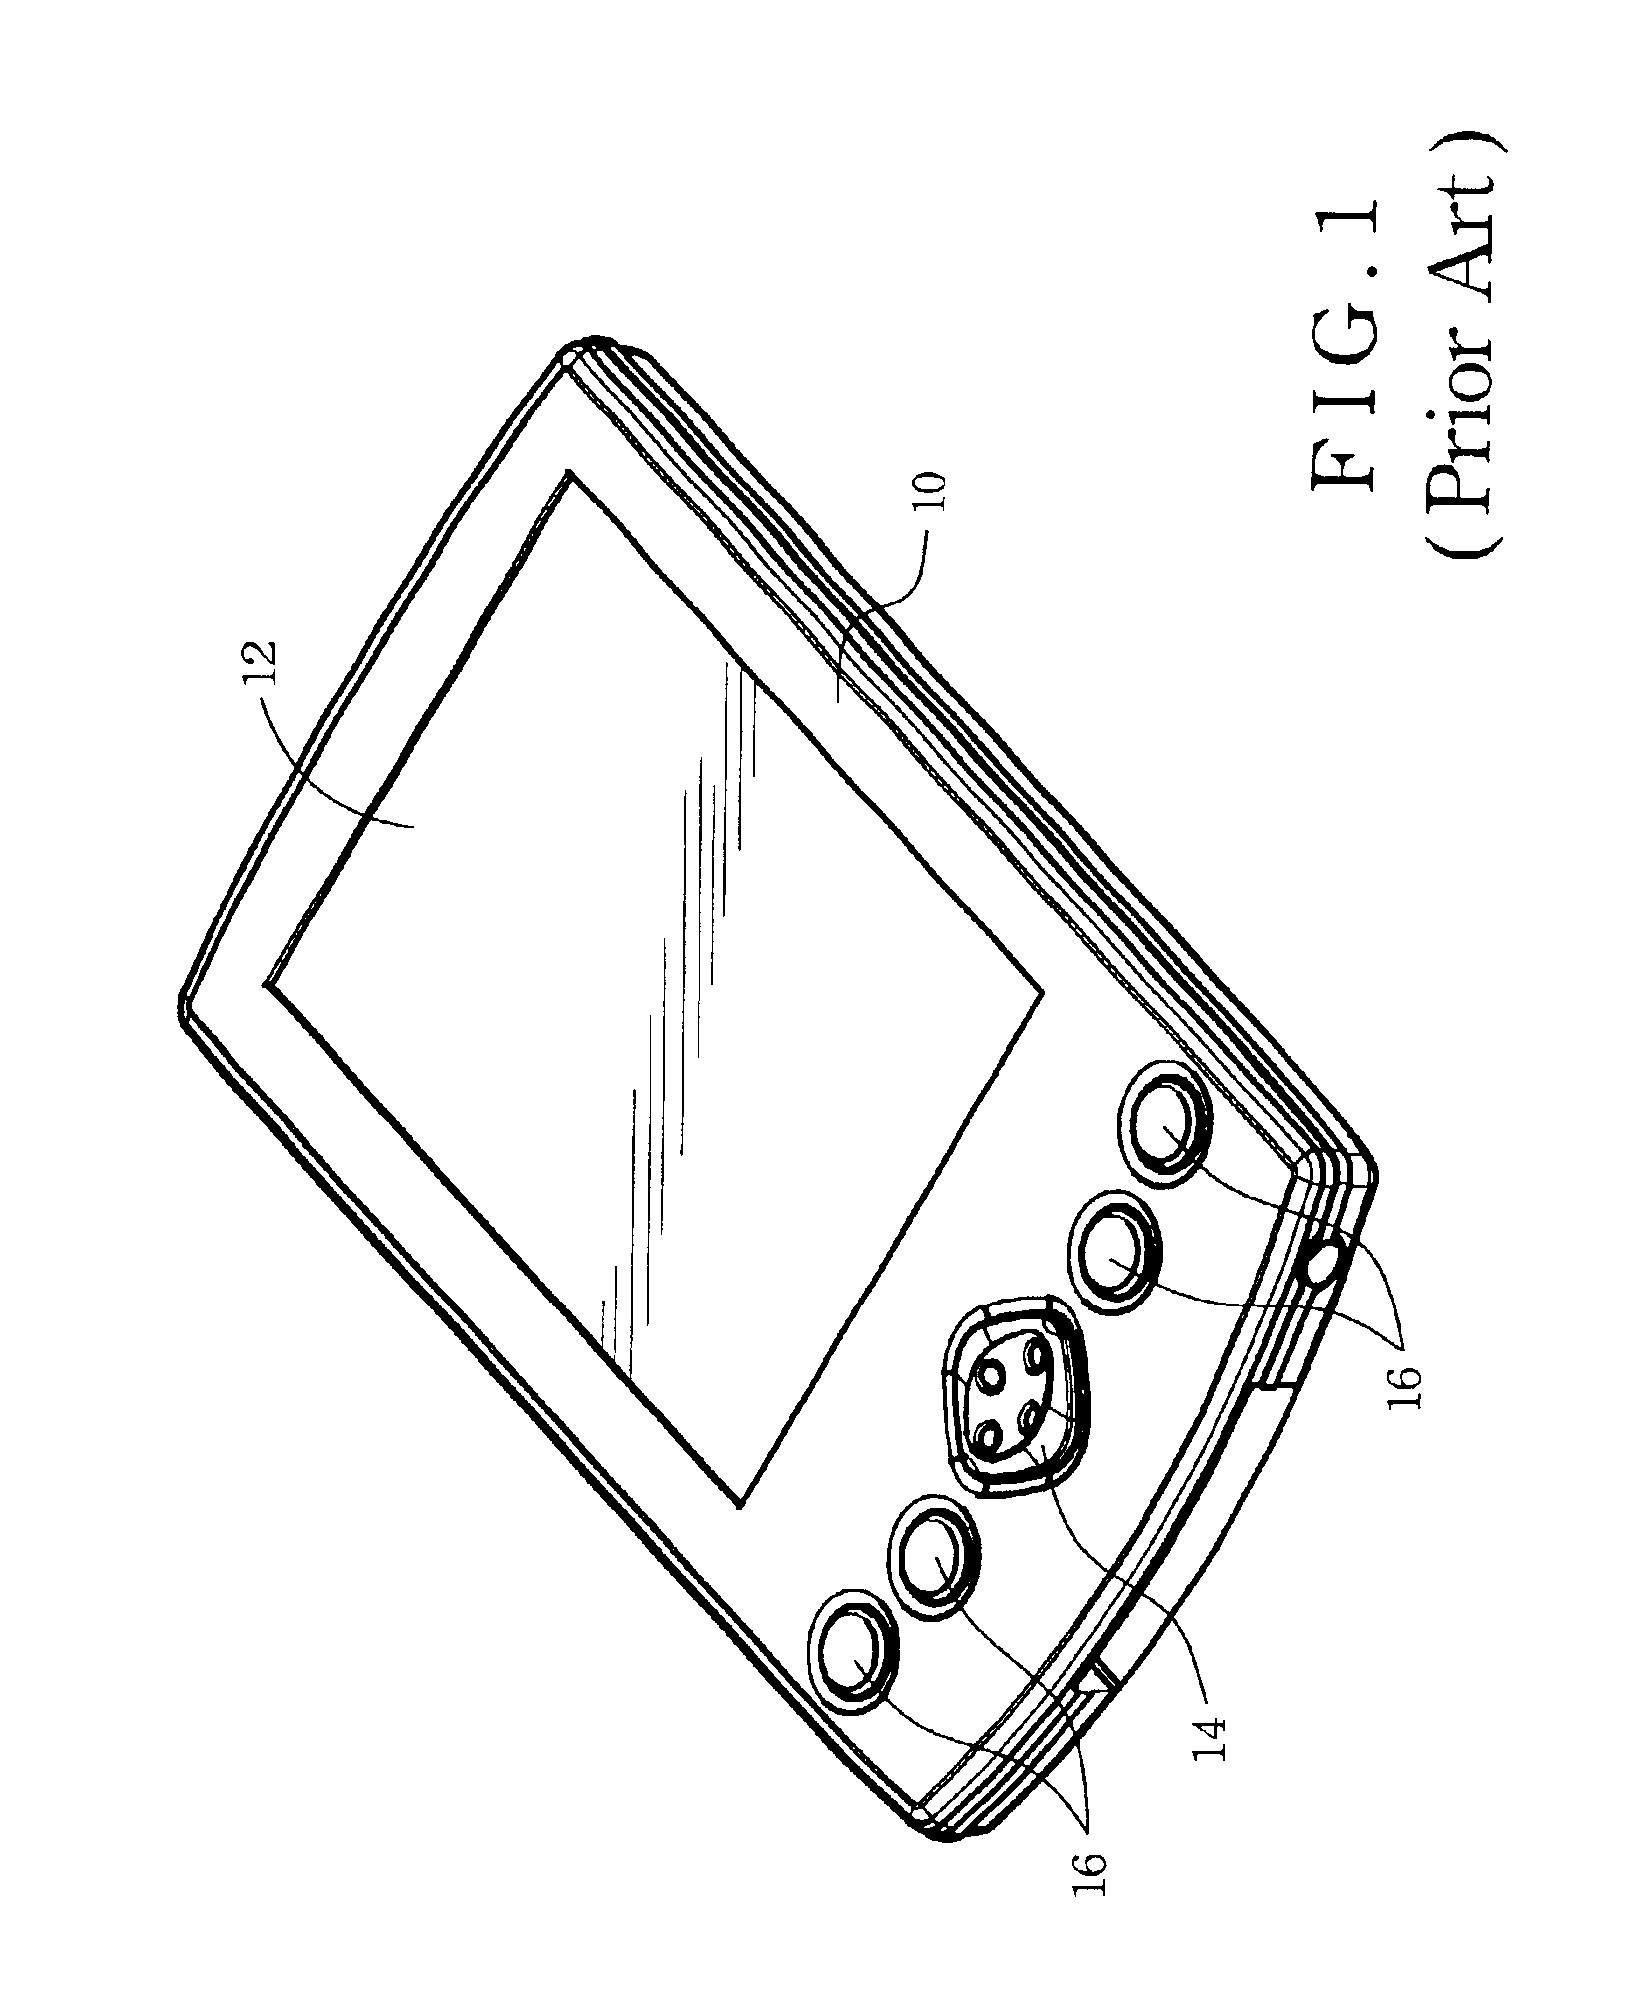 Button key structure integrated with a speaker